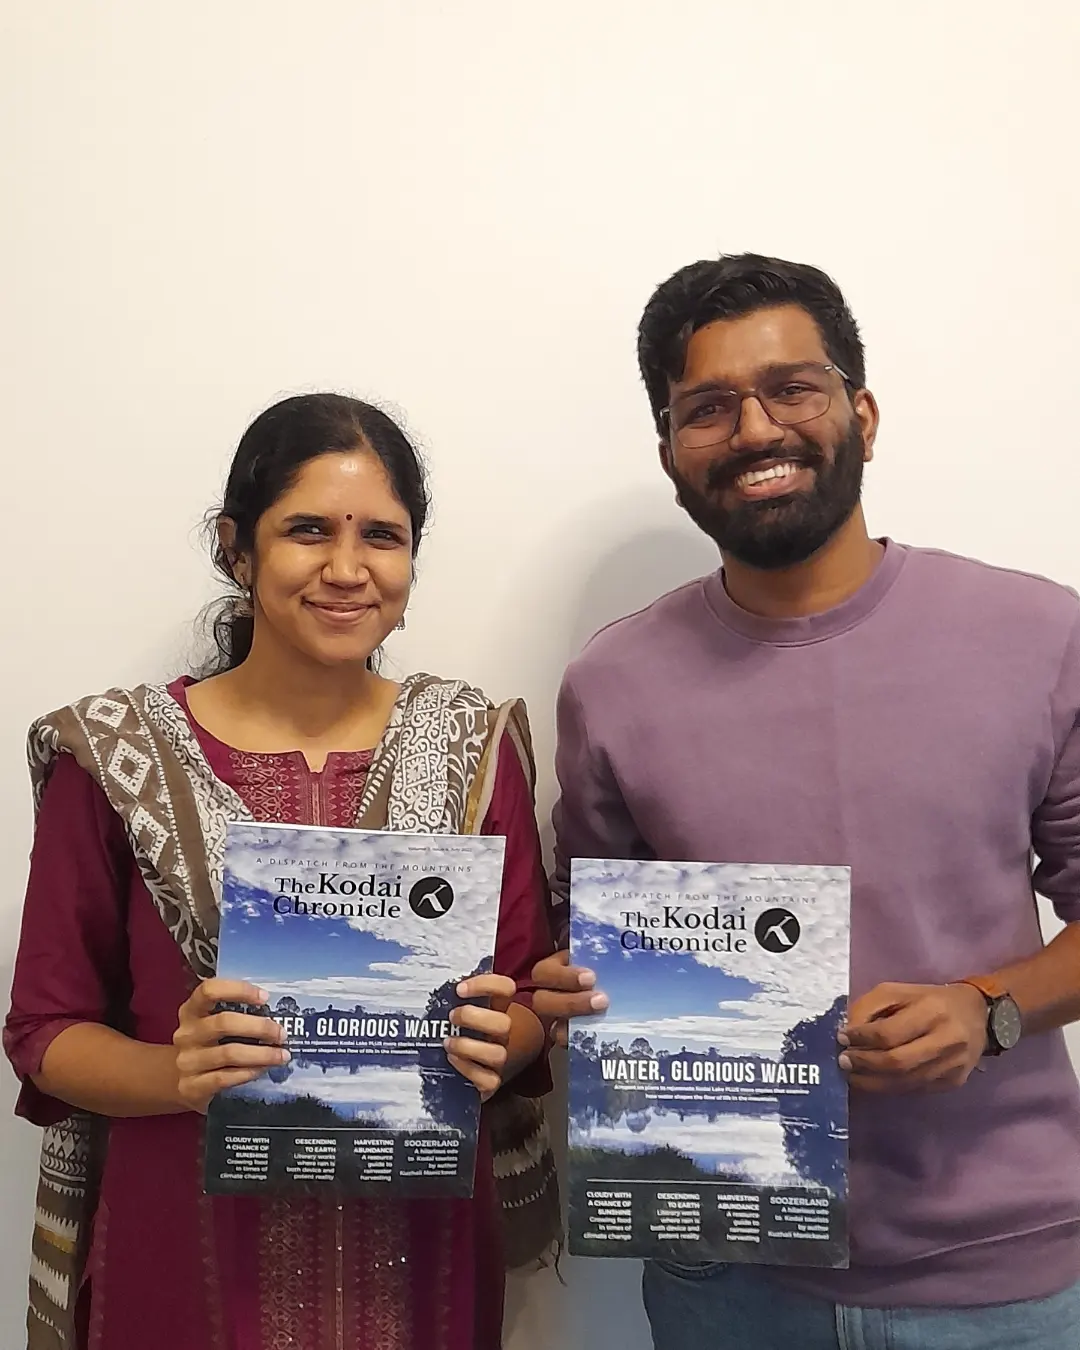 Sharmila and Nikhil of Nature in Focus, in Bangalore